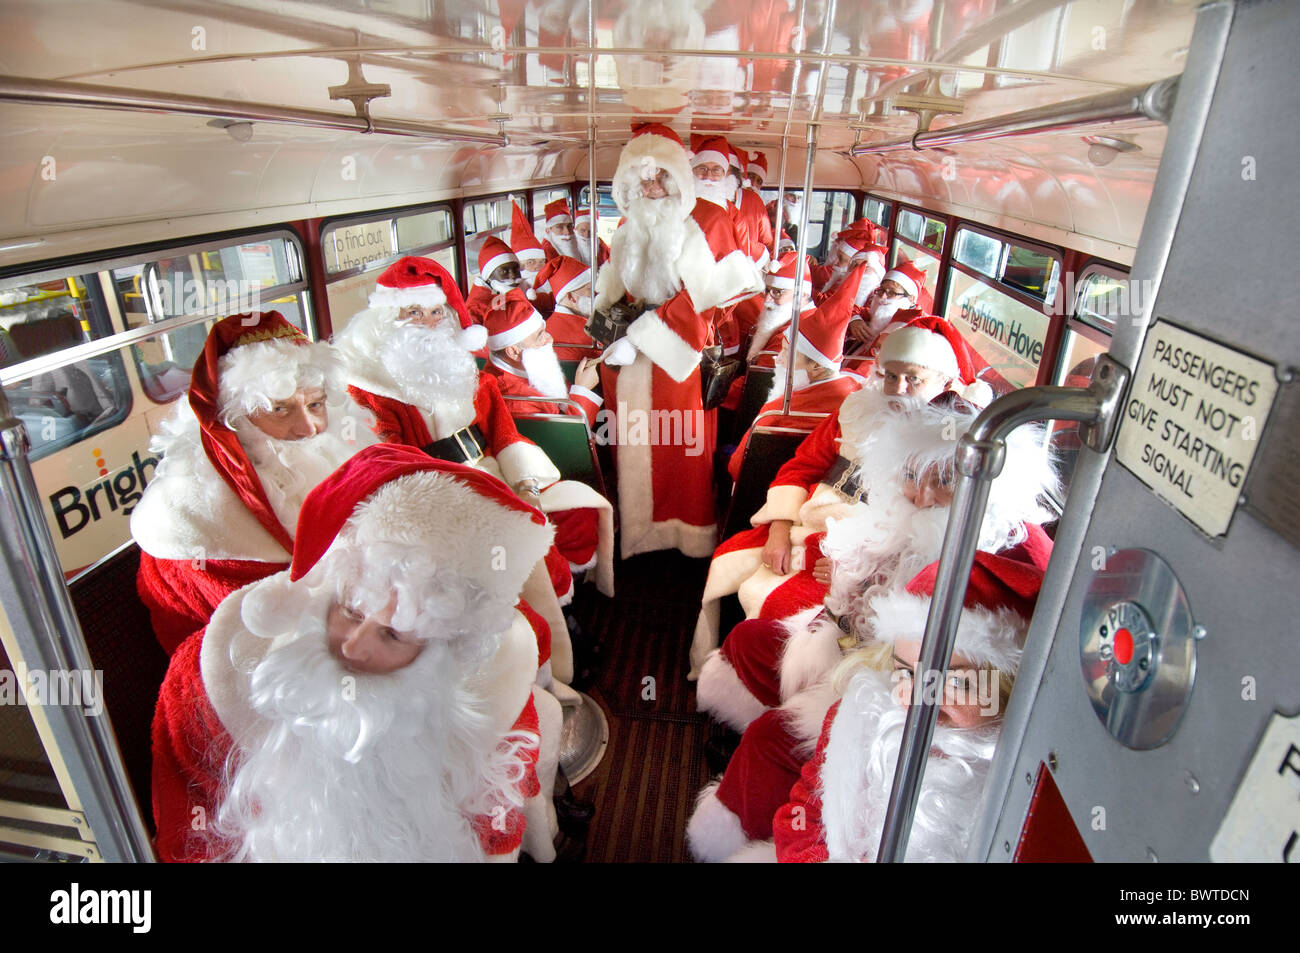 Members of the Brighton and Hove Bus Company staff prepare for the annual Santa Buses they run every Christmas. Stock Photo